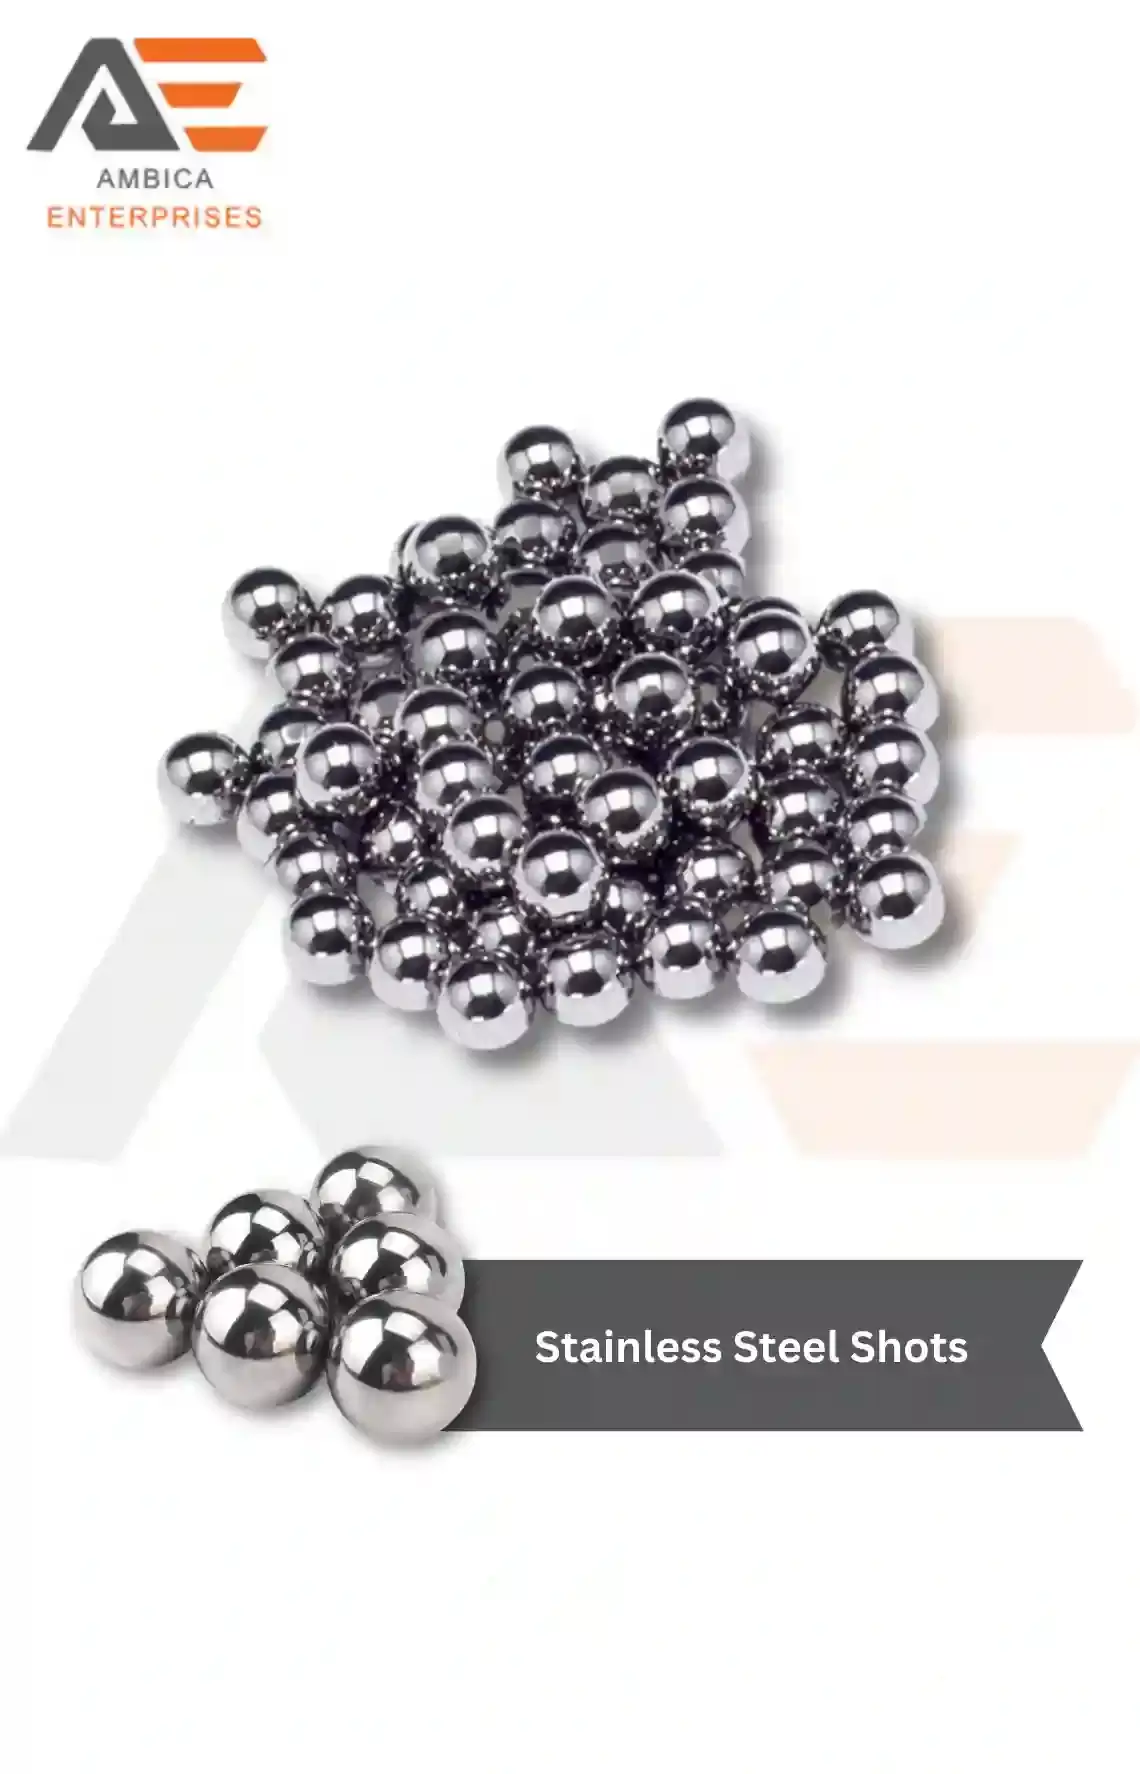 Stainless Steel Shots